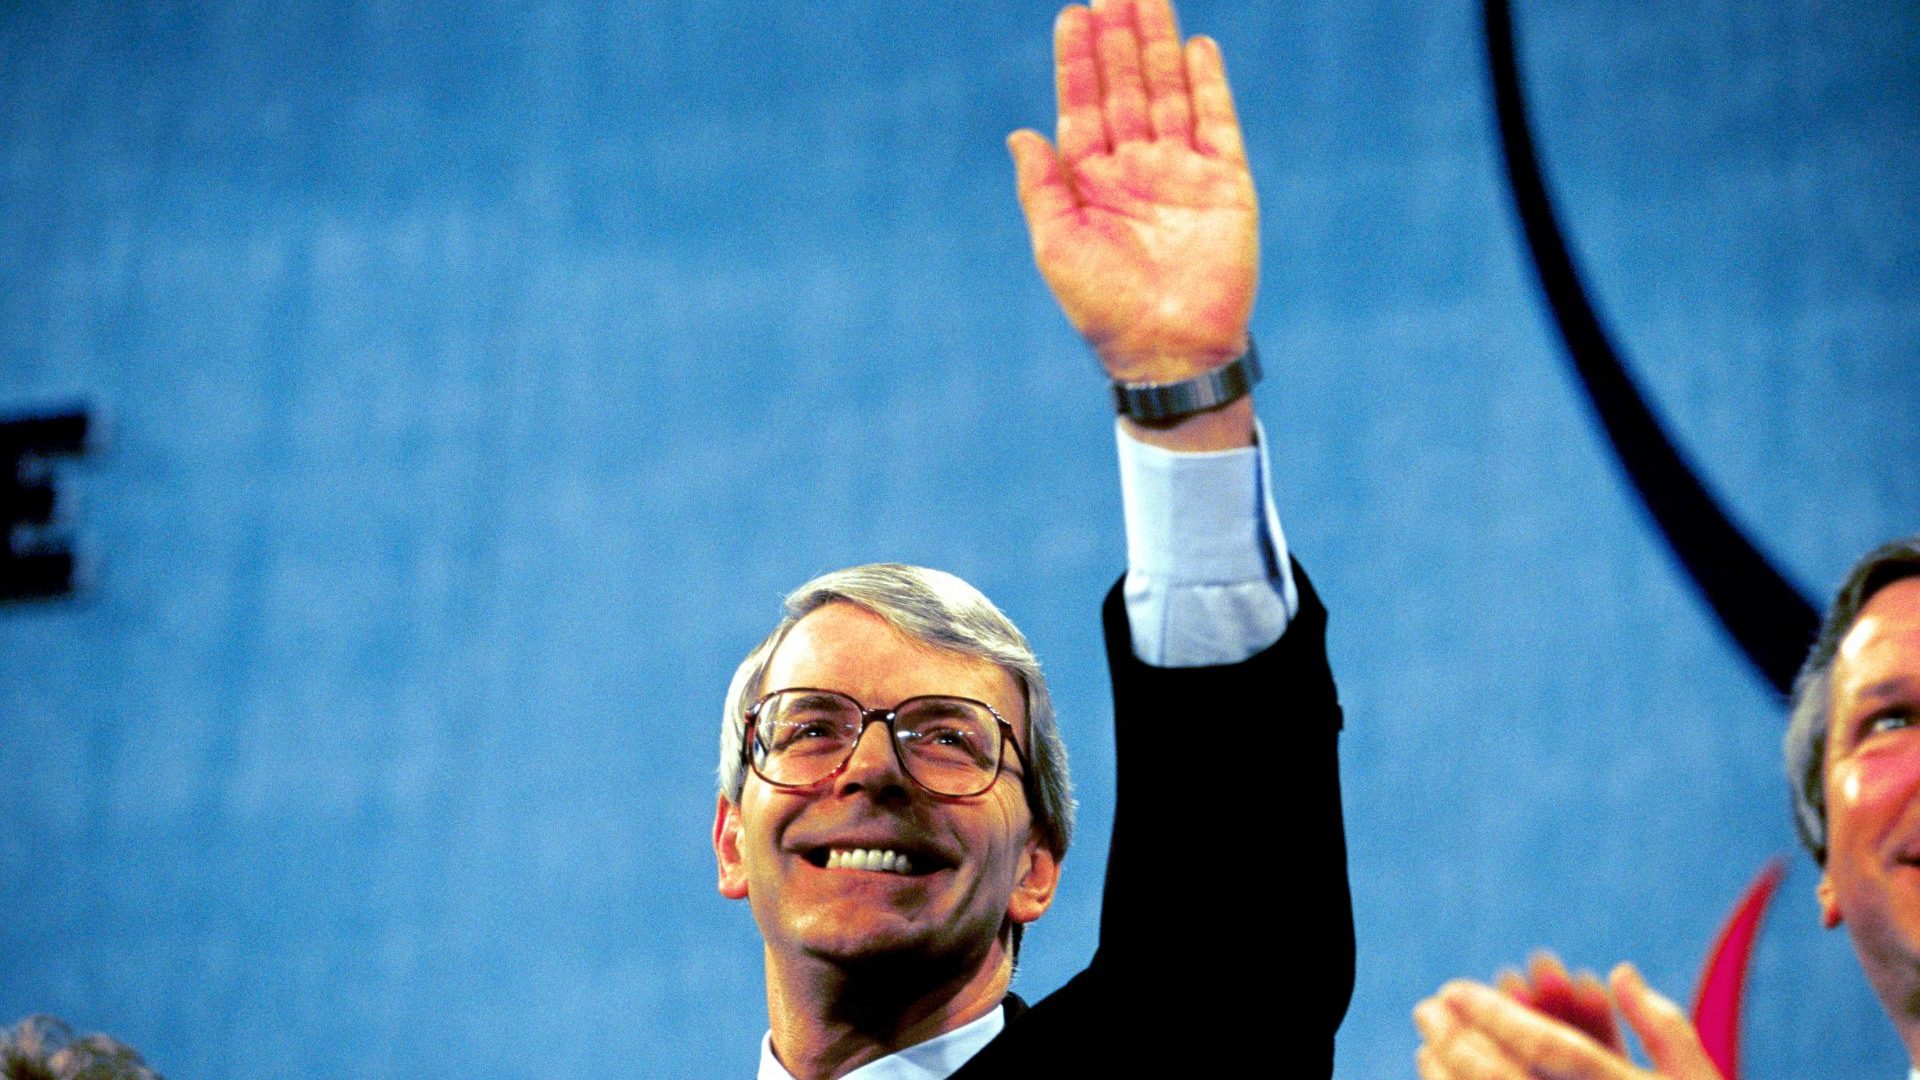 Former prime minister John Major, whose 1992 general election victory defied polling expectations. Photo: In Pictures Ltd/Corbis/Getty